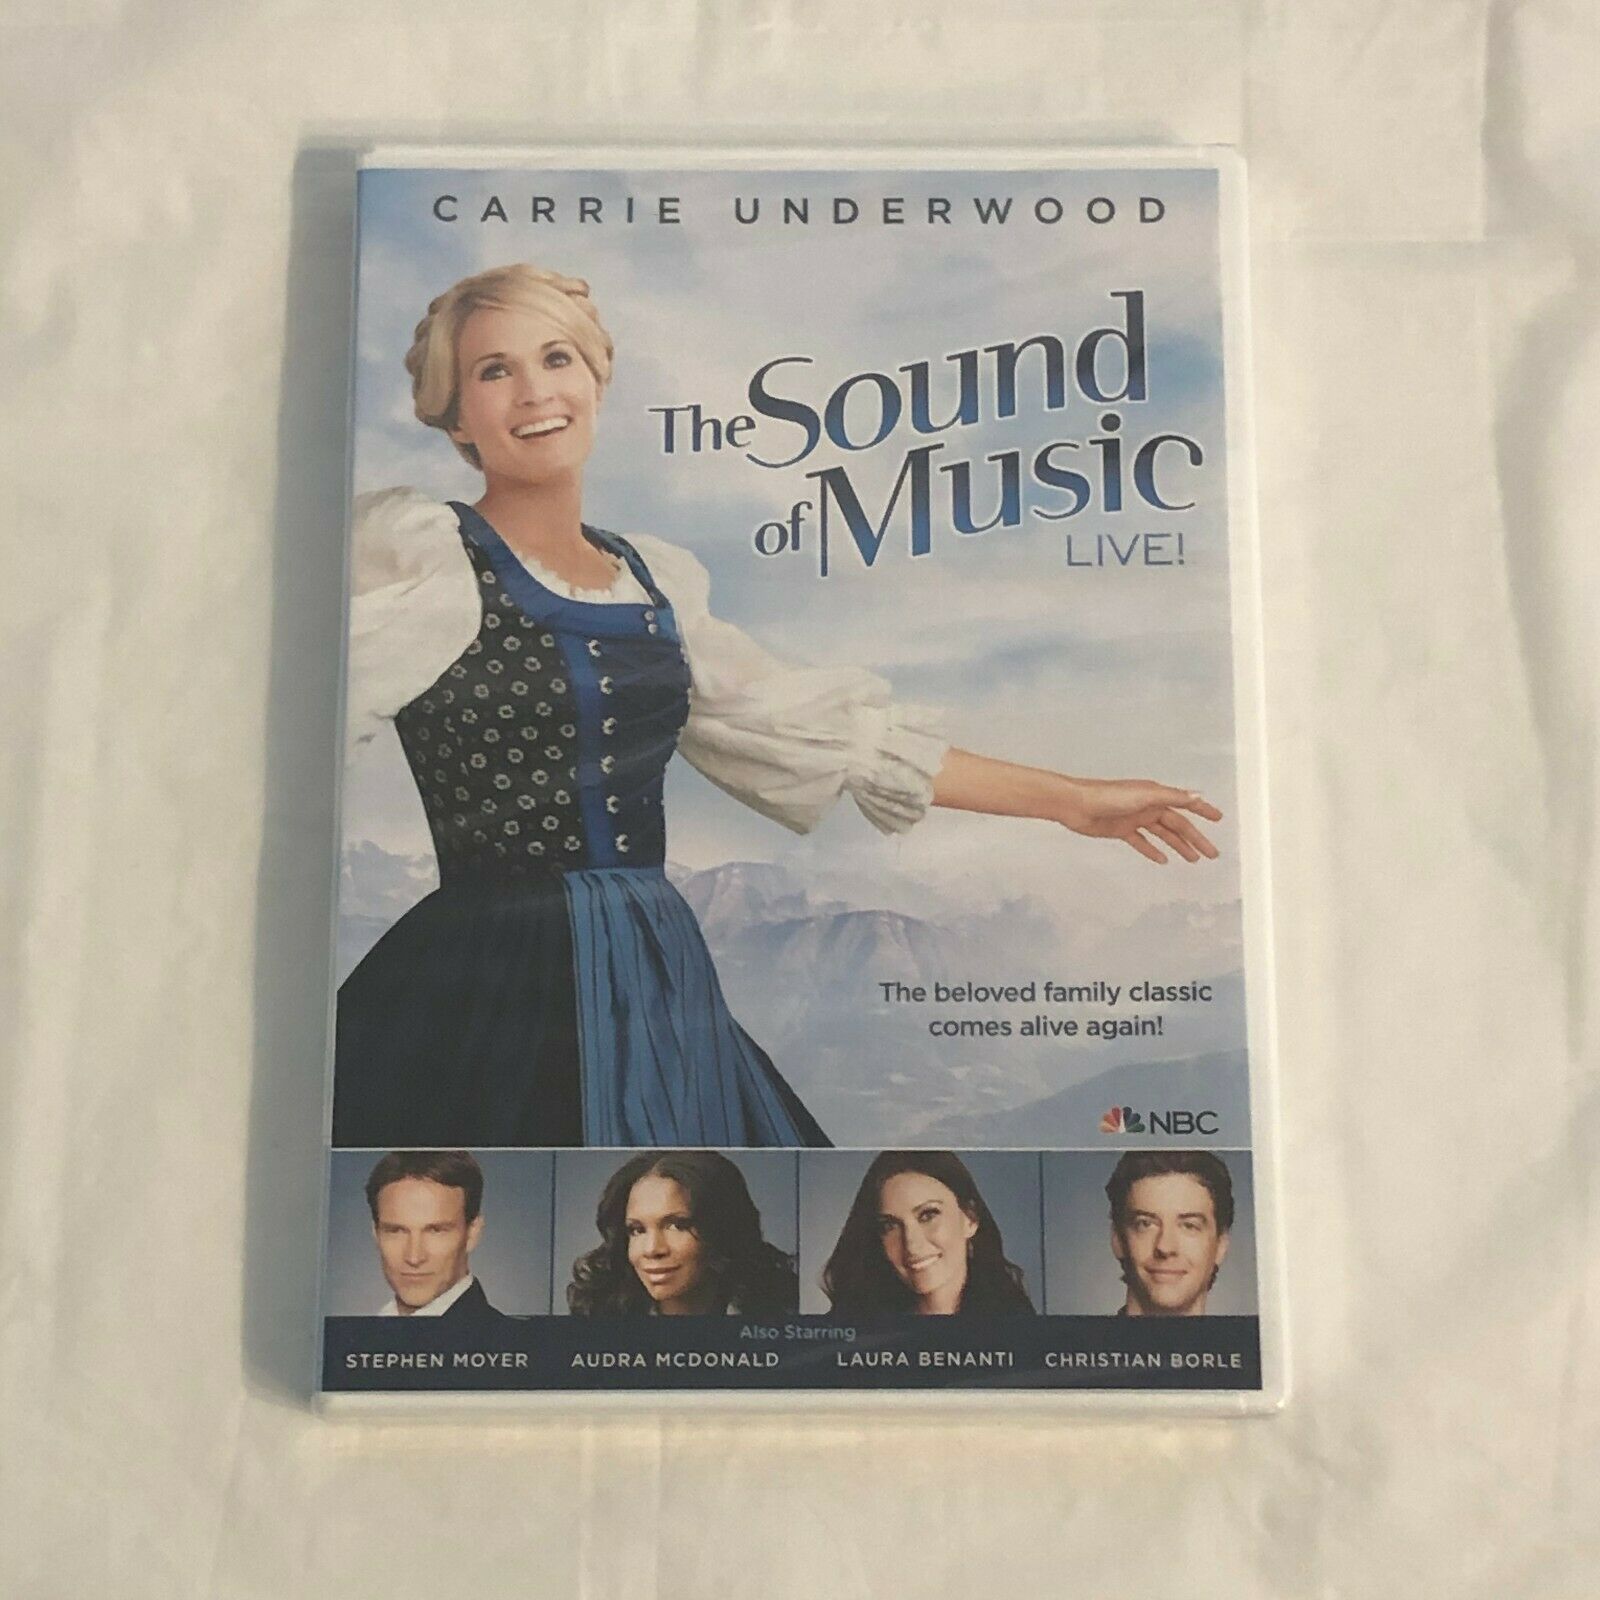 NEW & SEALED The Sound of Music Live! DVD